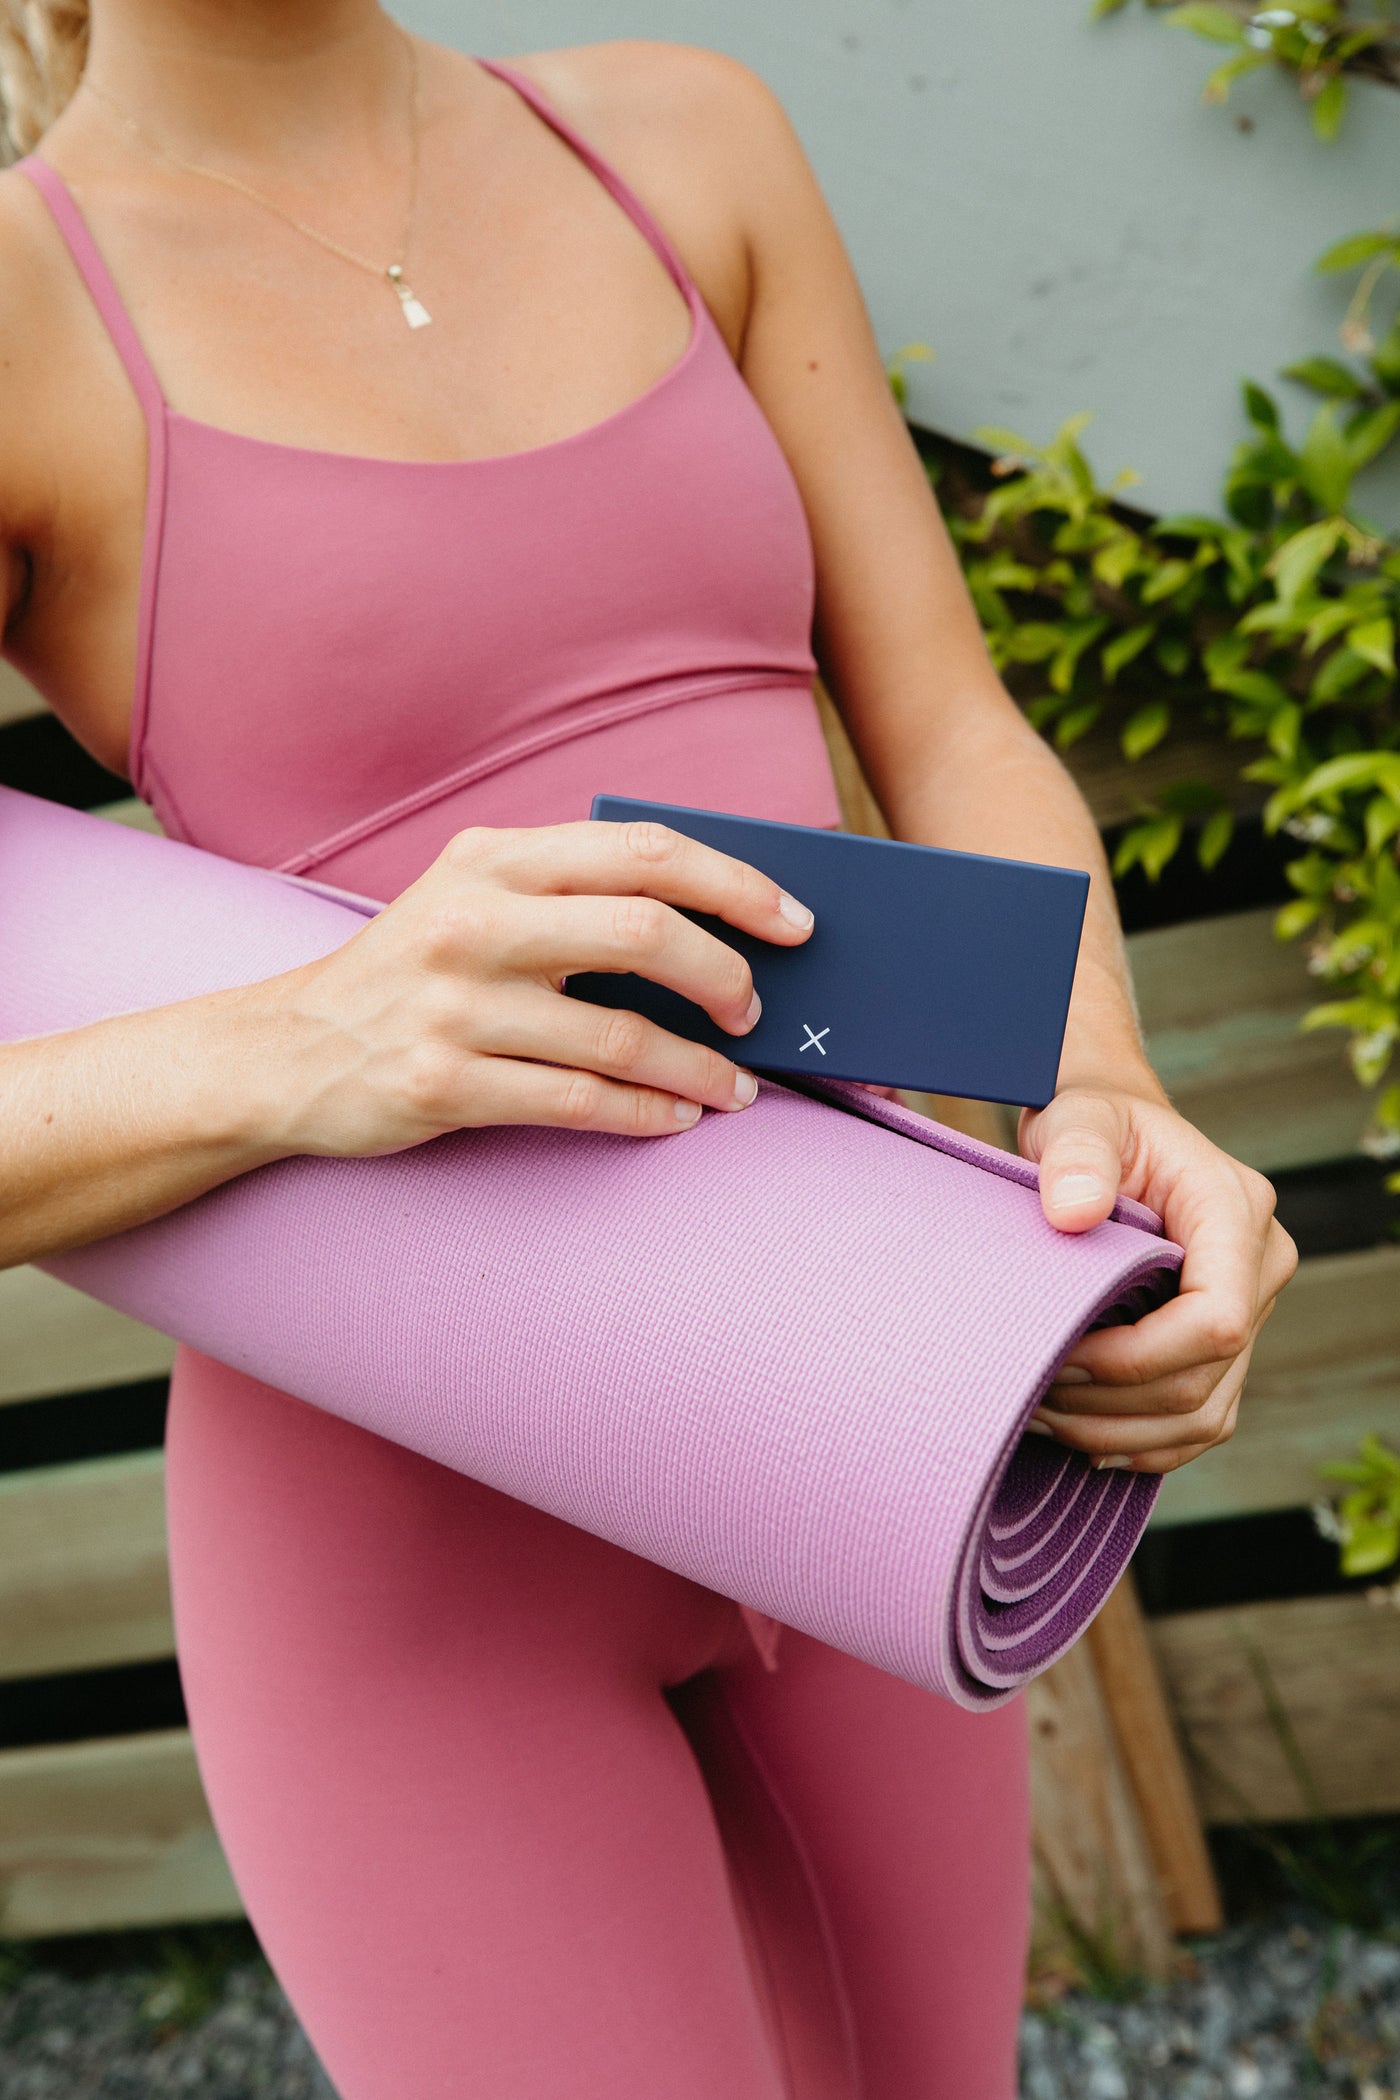 Cute blue Port and Polish pill box being held by a woman wearing pink yoga clothes and carrying a pink yoga mat